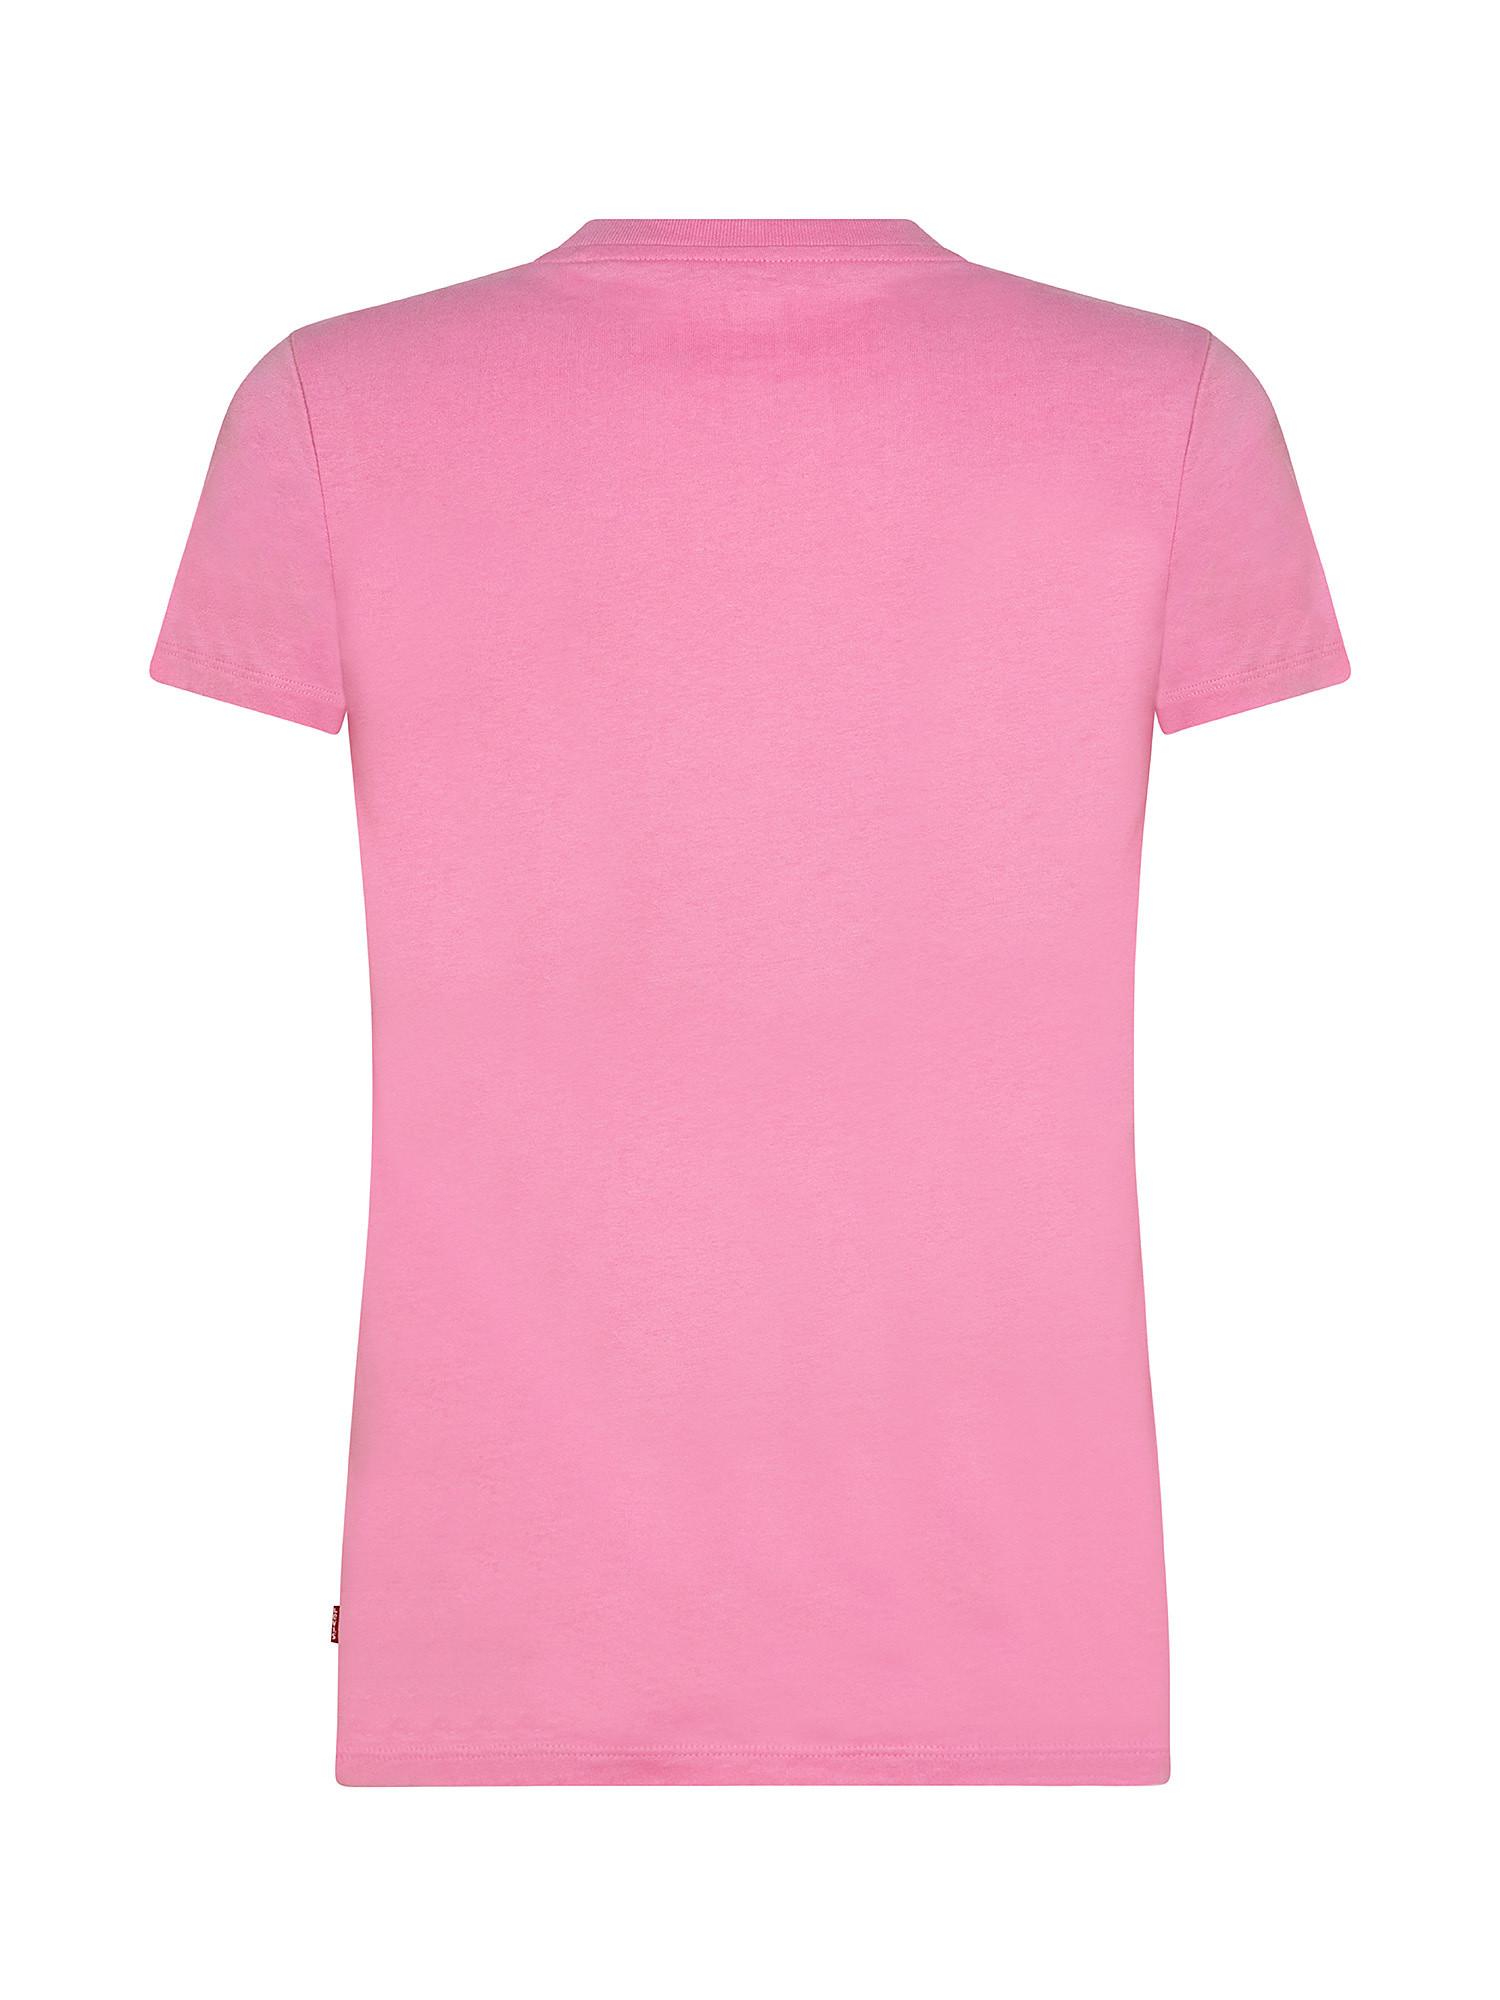 T-shirt Perfect Tee, Rosa, large image number 1